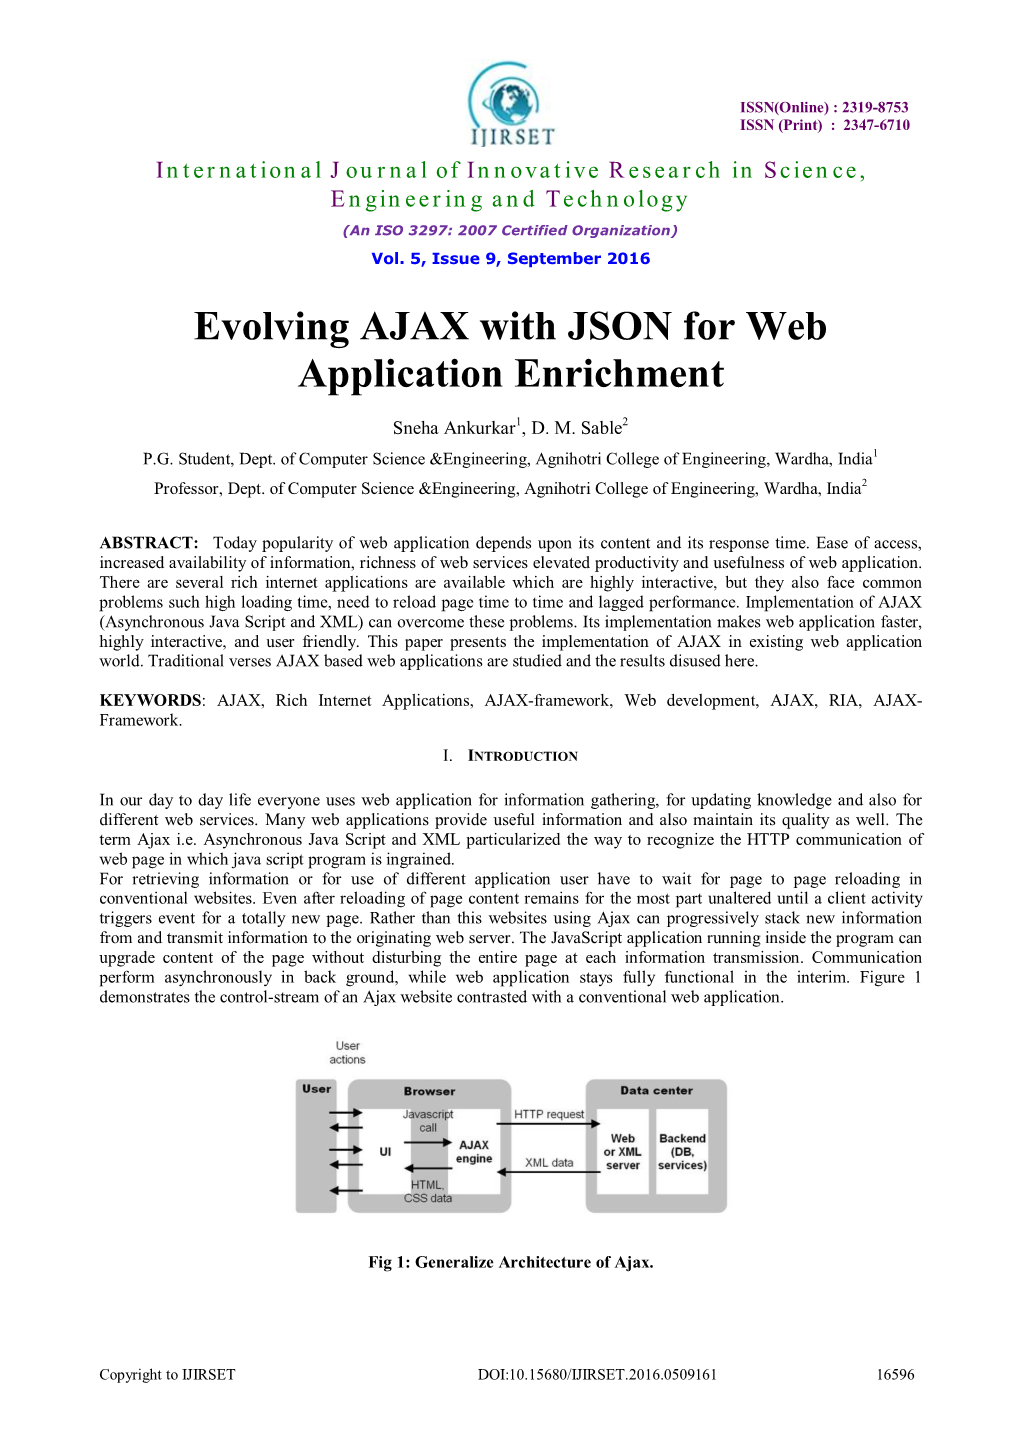 Evolving AJAX with JSON for Web Application Enrichment